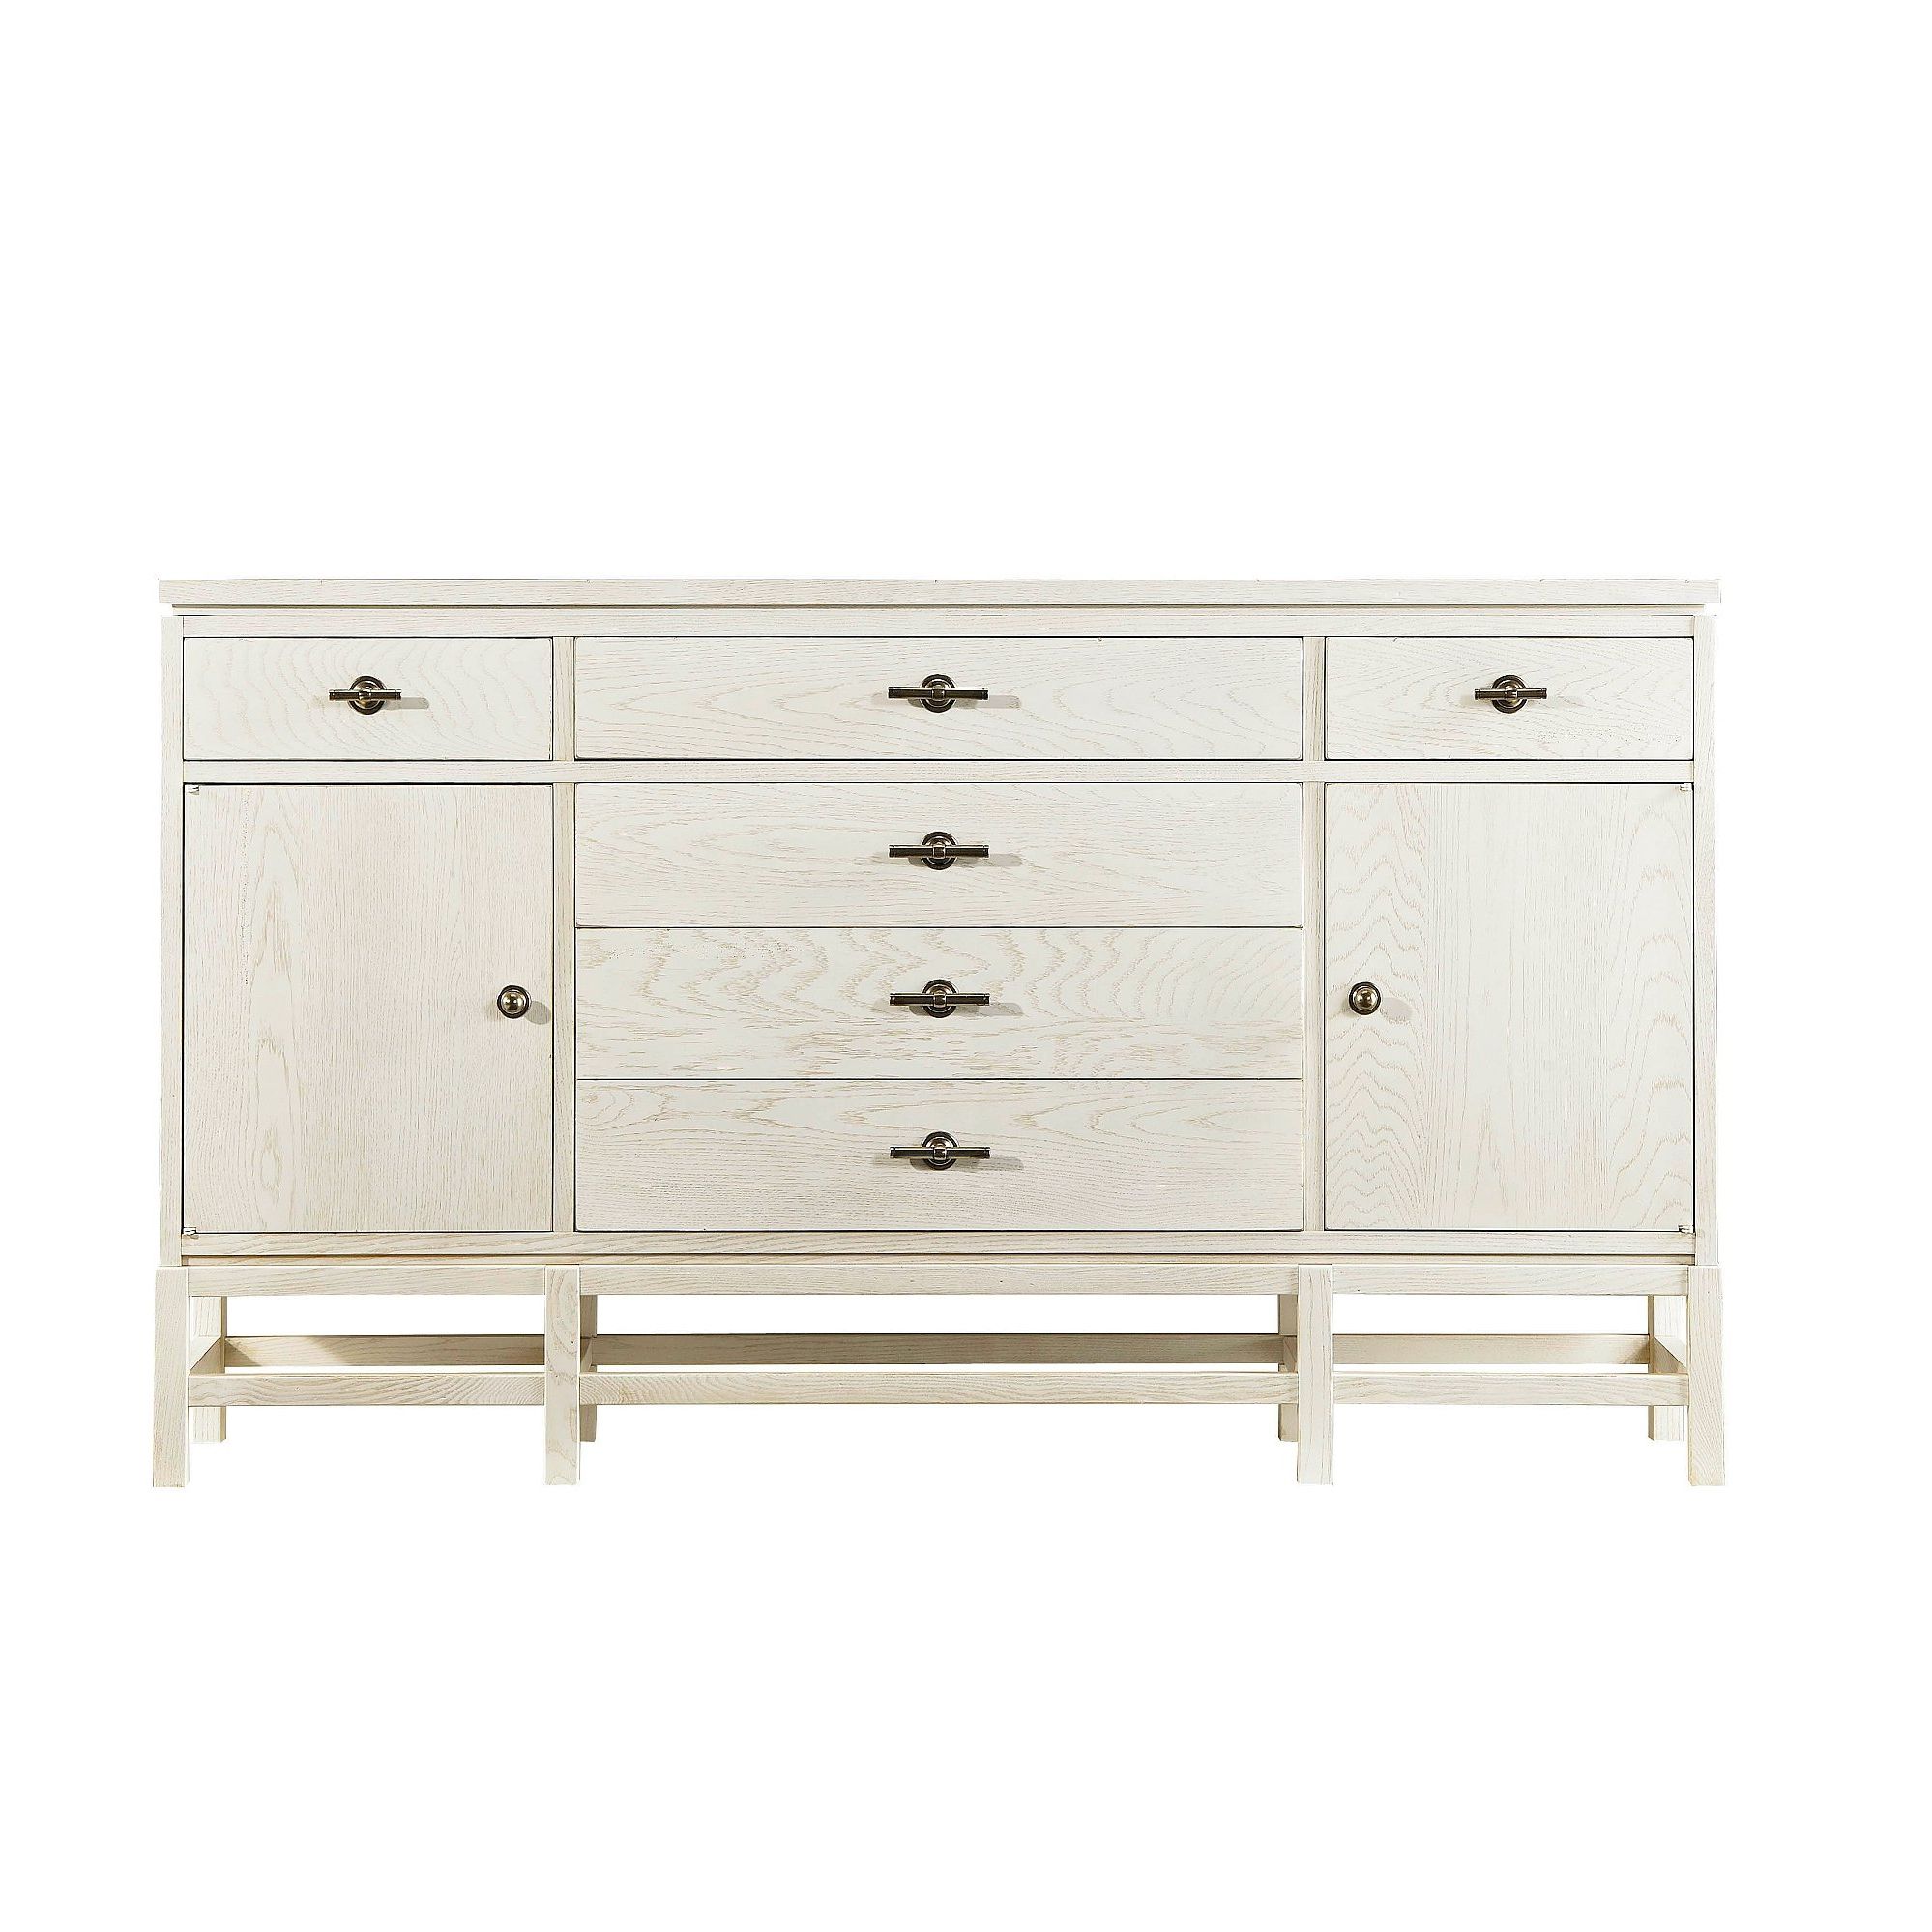 Favorite Silverware Storage Equipped Sideboards & Buffets (View 14 of 20)